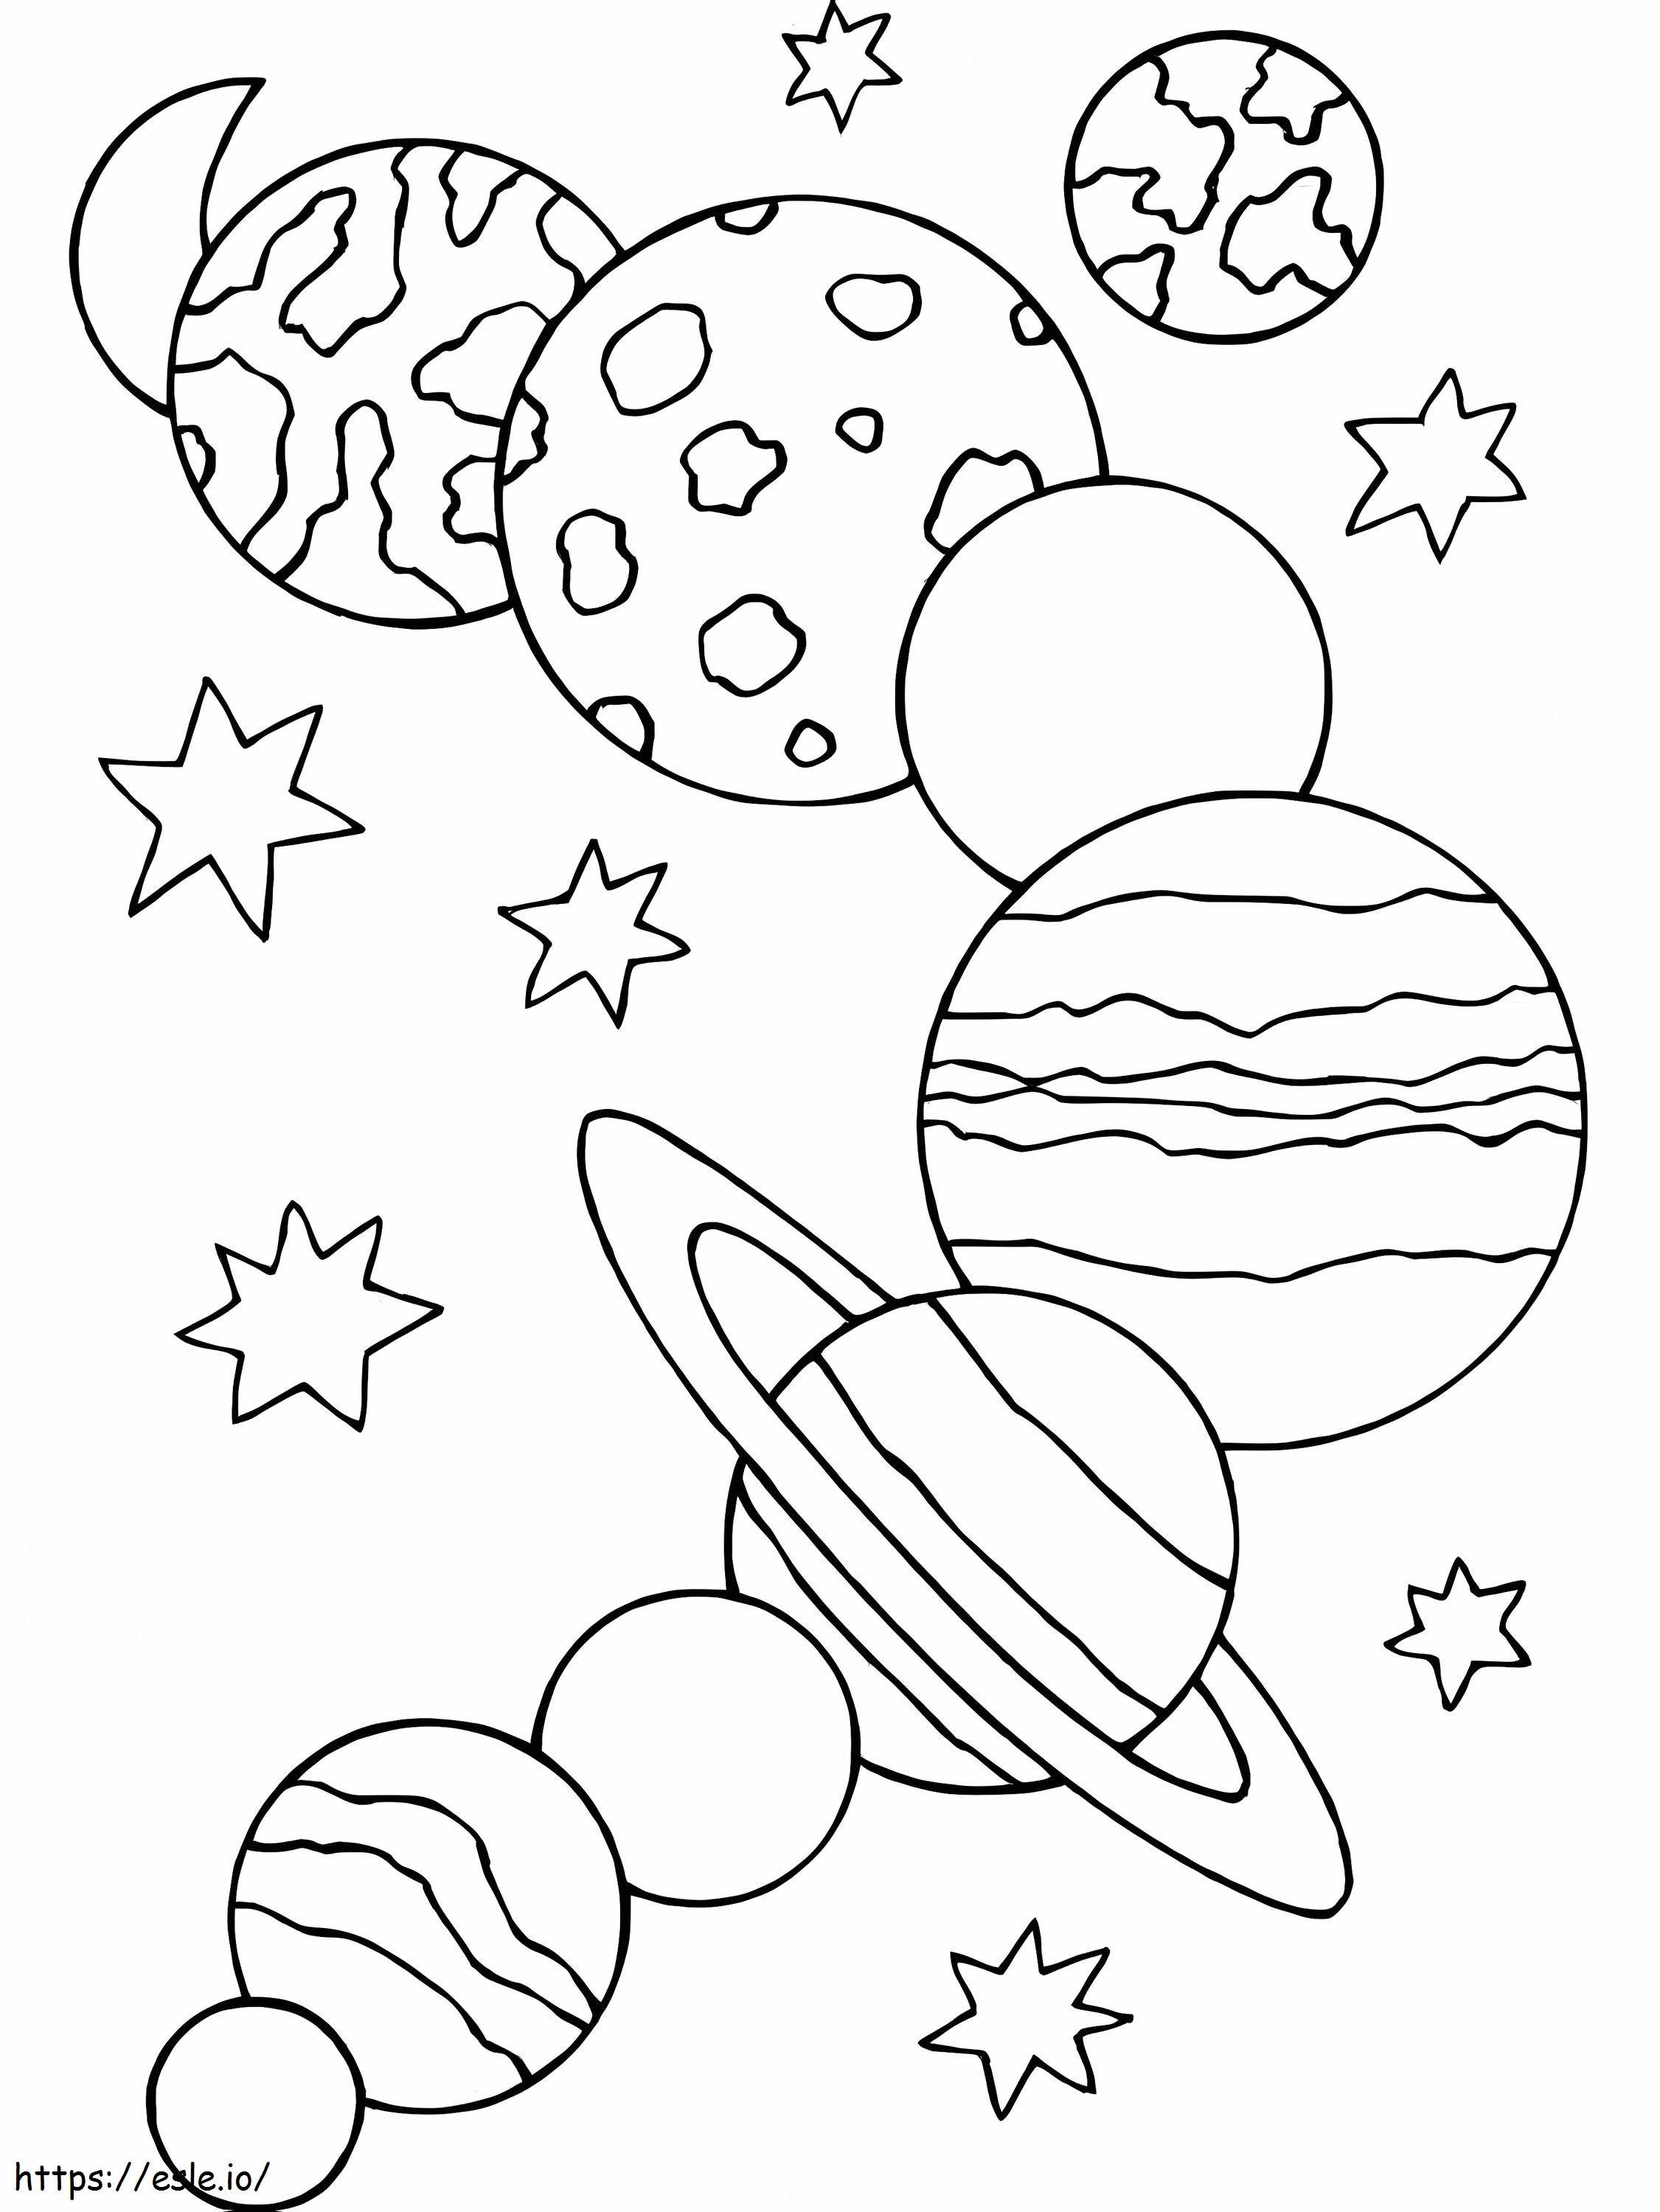 Good Planets coloring page